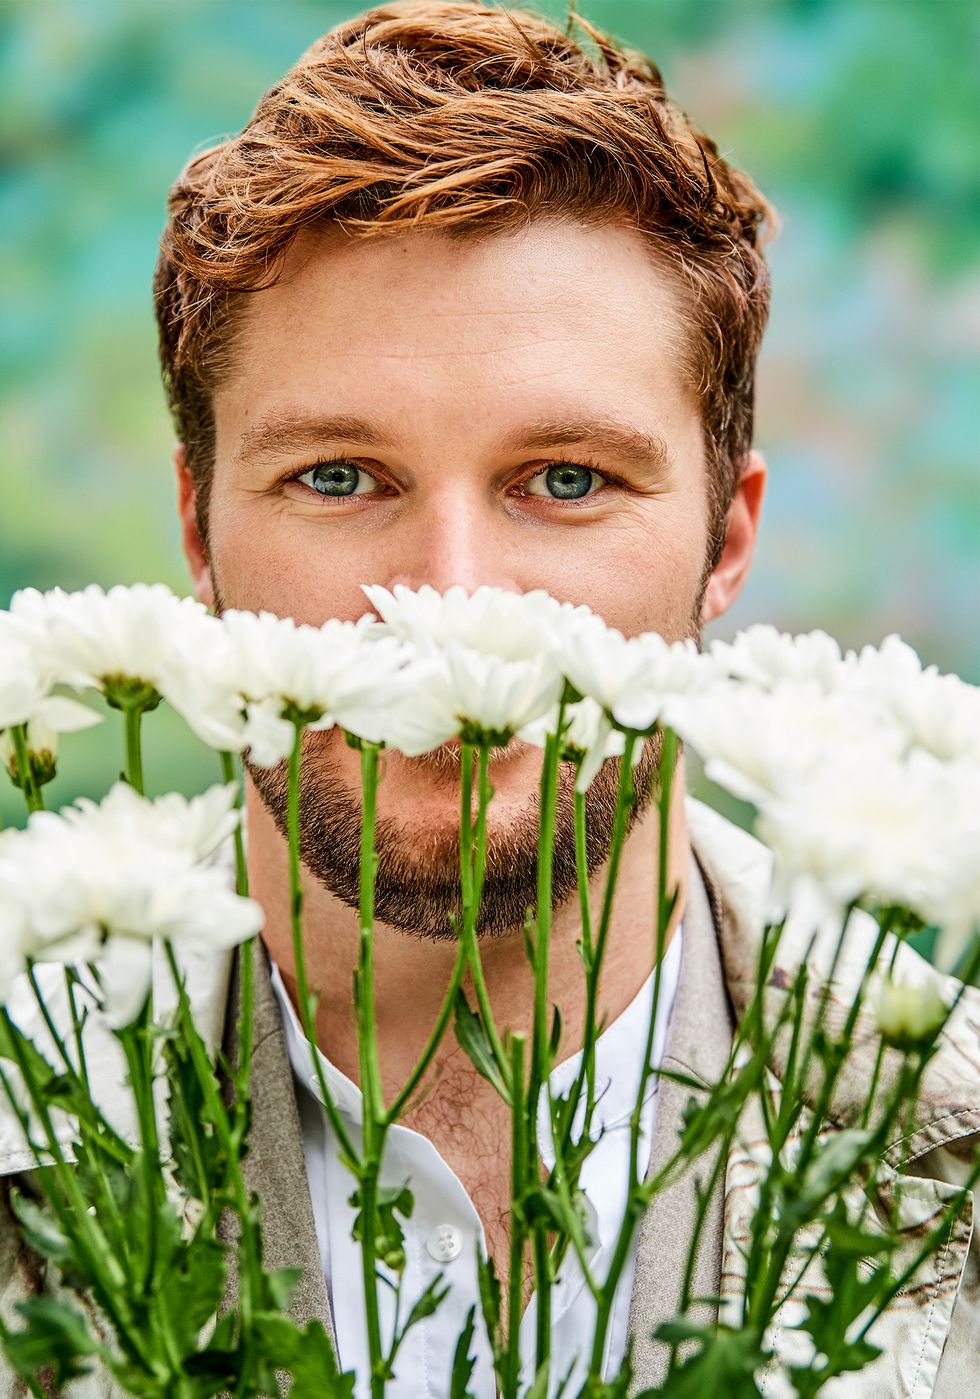 Facial hair, Grass, Flower, Plant, Beard, Smile, Happy, Child, mayweed, Portrait photography, 